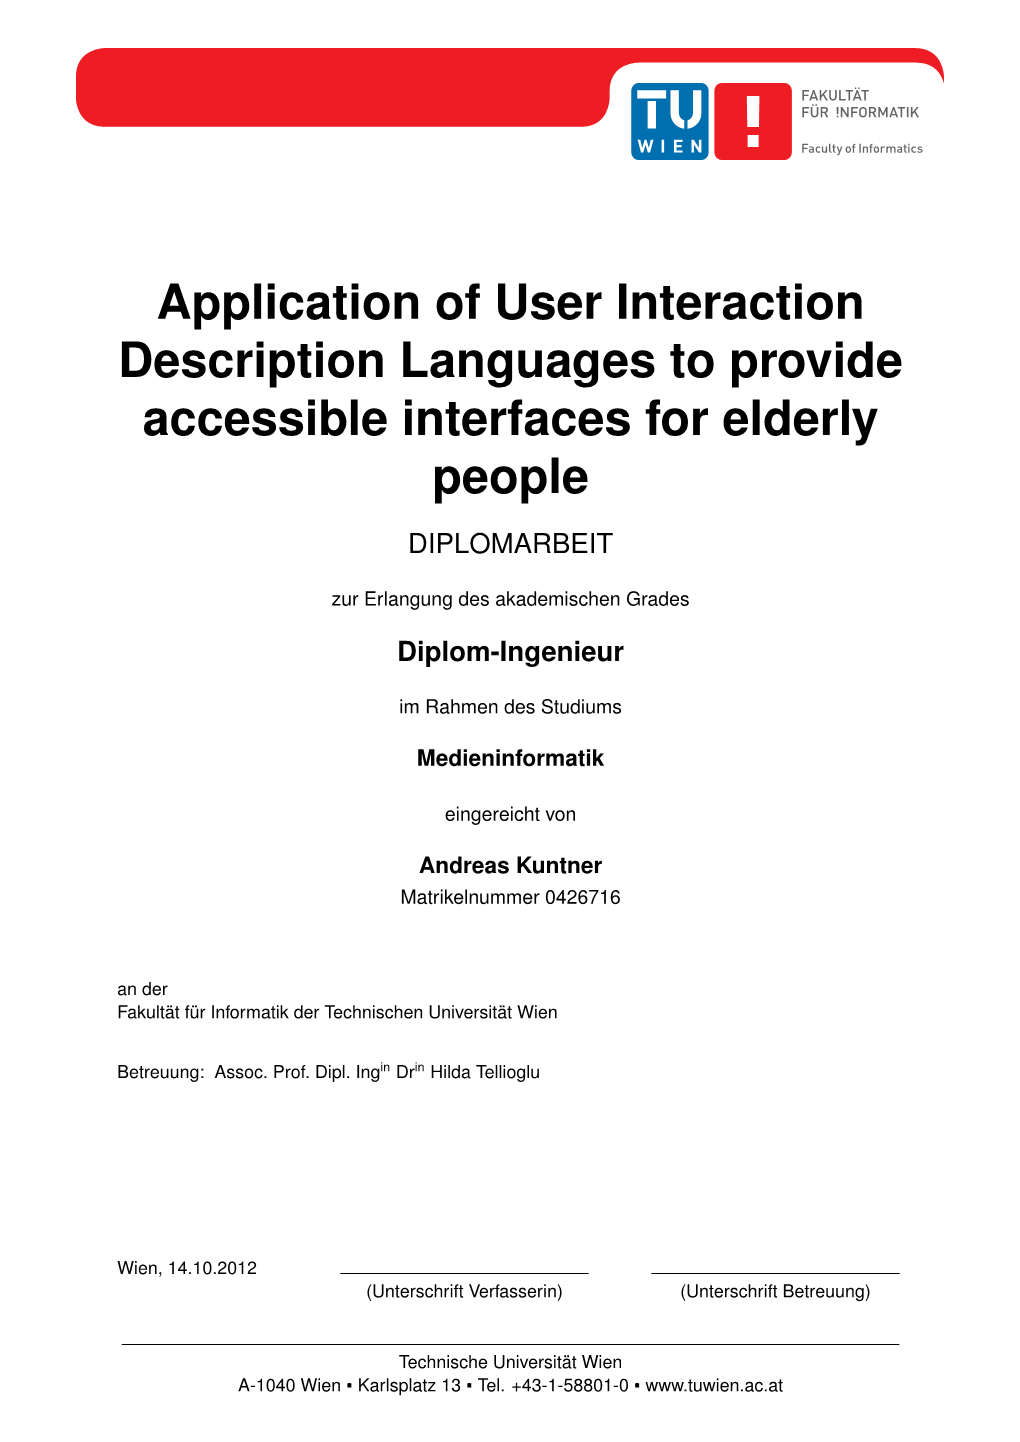 Application of User Interaction Description Languages to Provide Accessible Interfaces for Elderly People